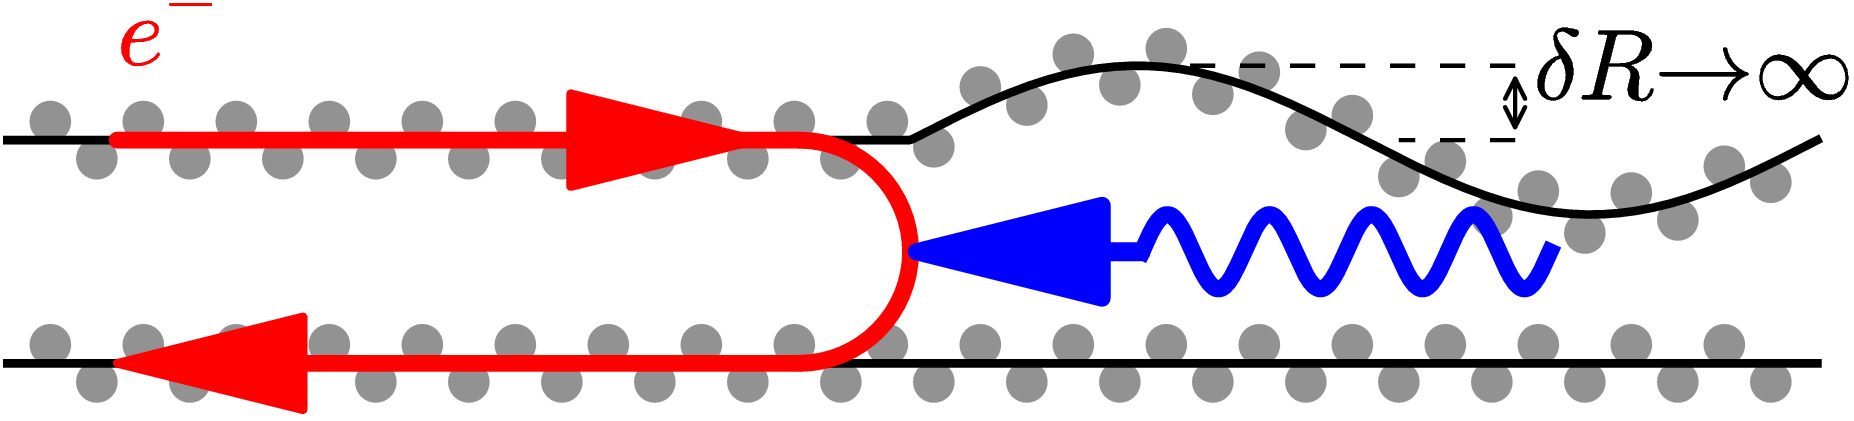 Picture of a scattering event with a flexural phonon